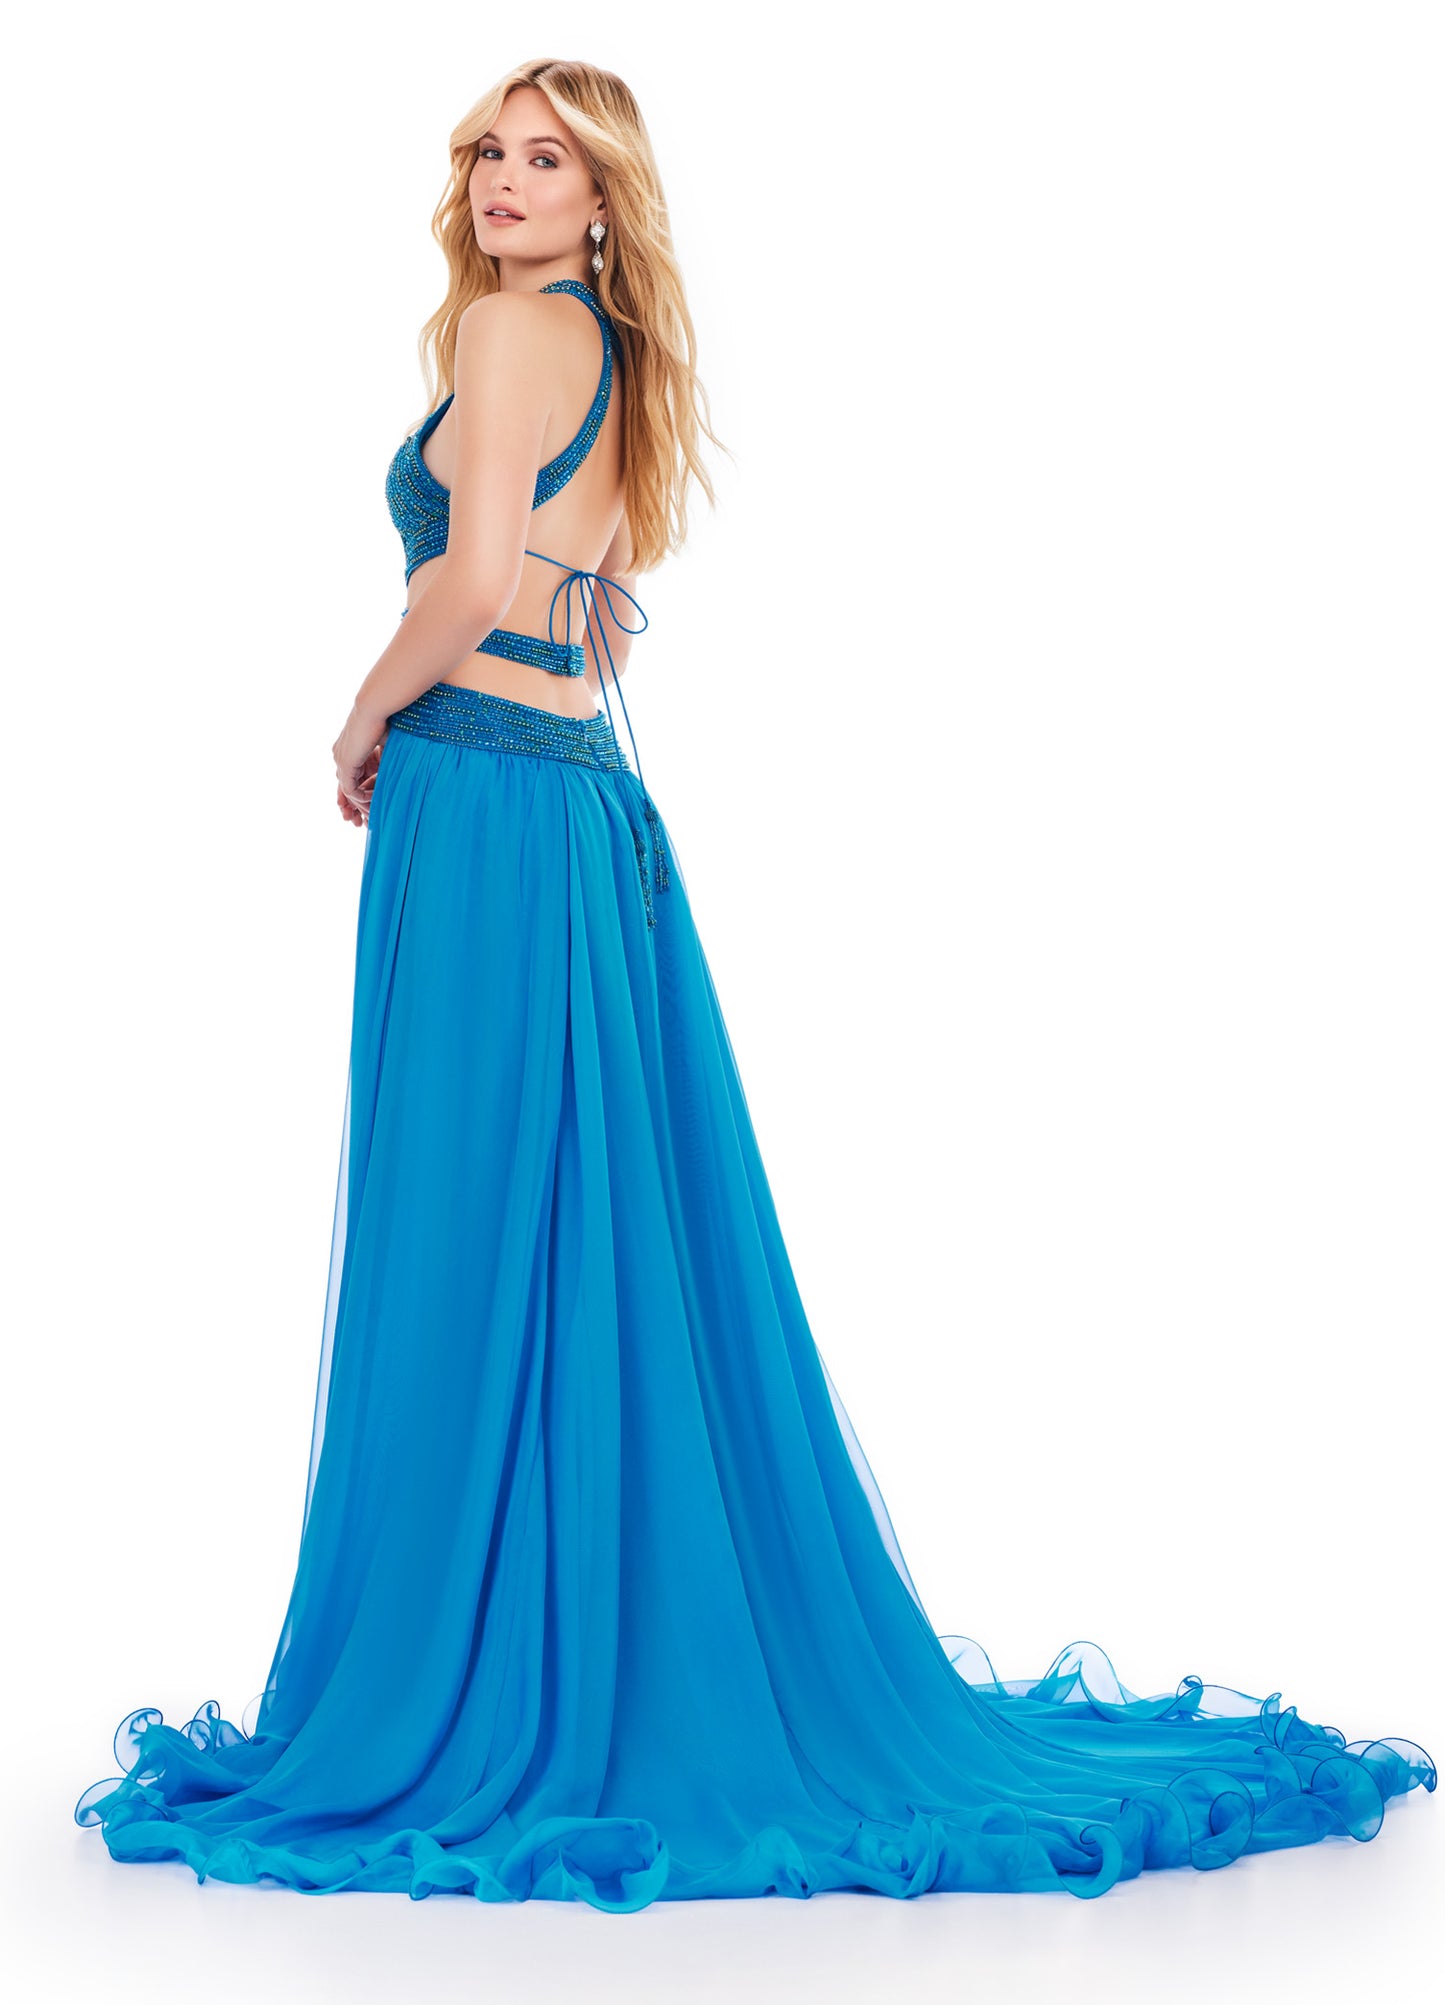 Elevate your formal attire with the Ashley Lauren 11504 Long Prom Dress. The cut out gown boasts a beaded bustier and chiffon skirt, creating a stunning silhouette that will turn heads. Perfect for prom, pageants, or any special occasion. Make a statement in this elegant and fashionable dress. Feel like royalty in this fabulous chiffon gown. The fully beaded bustier features intricate cut outs and an open back that'll be sure to set you apart from the crowd.